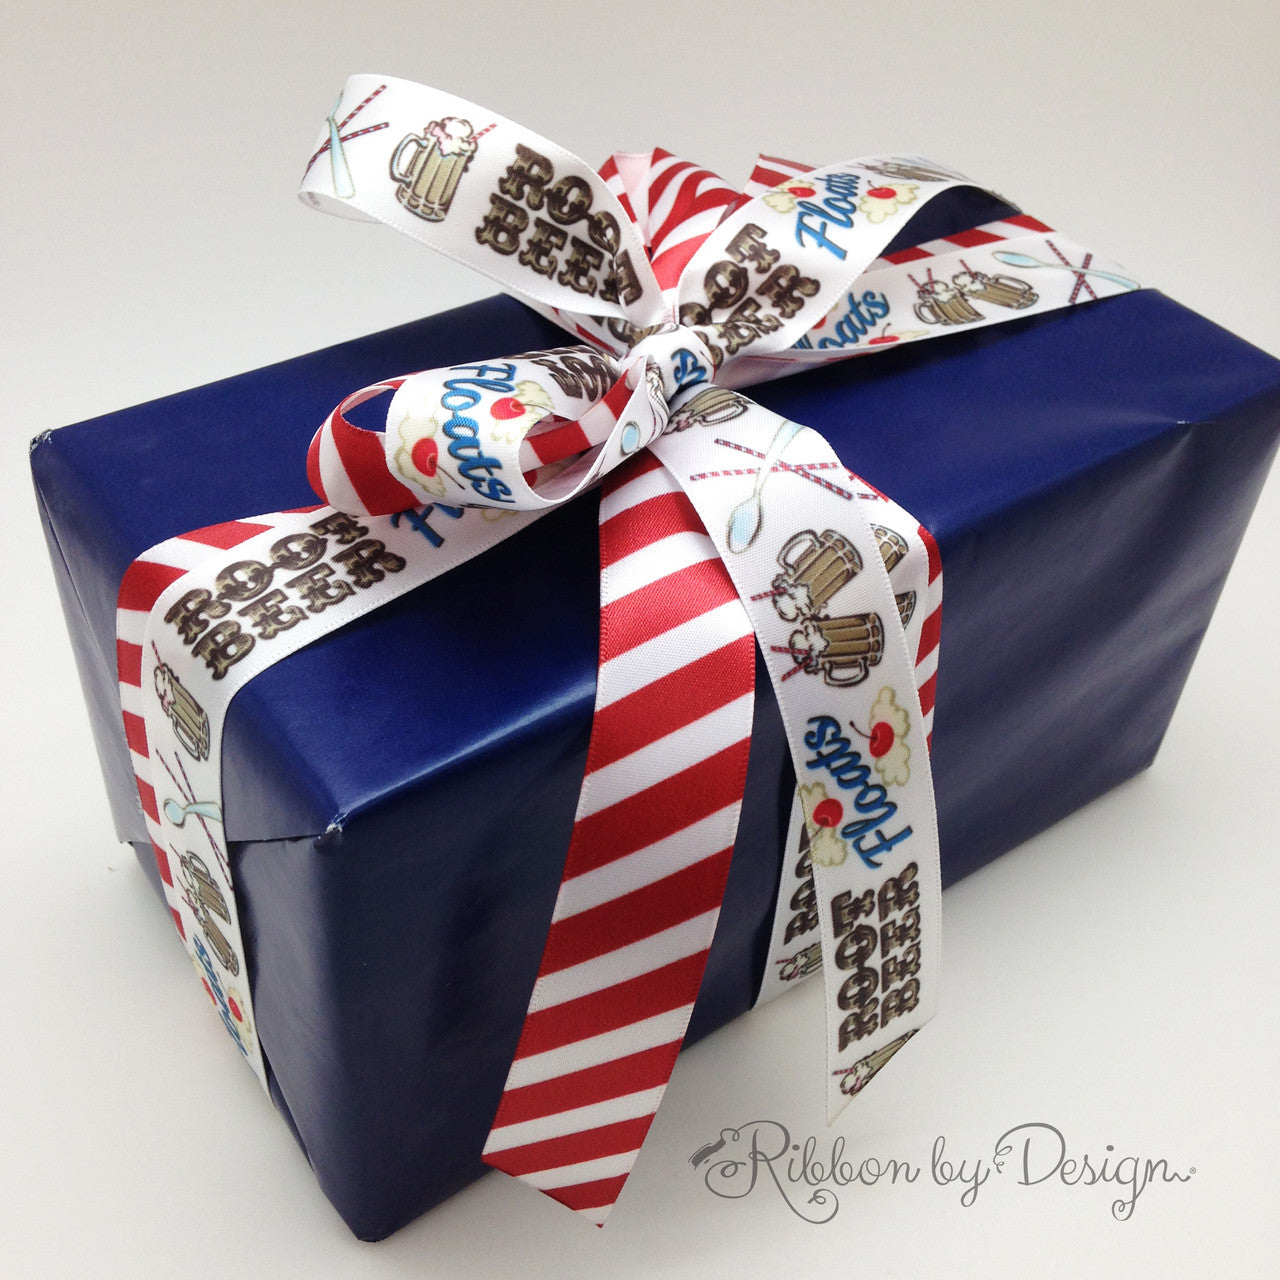 Mixed with our red and white stripe ribbon, this fun Father's Day gift will make Dad smile!